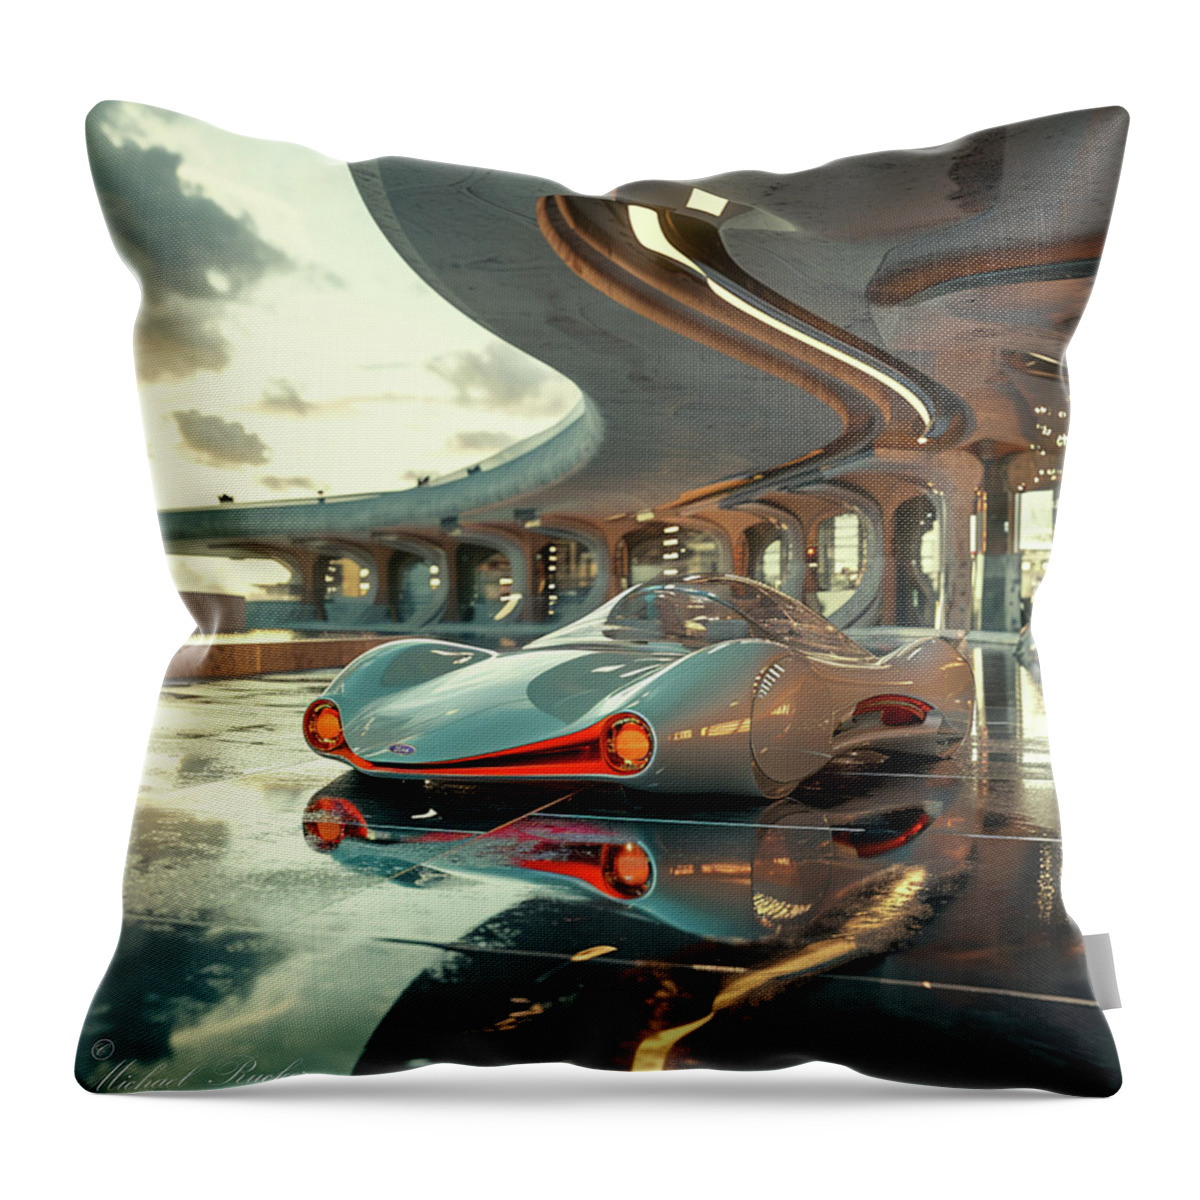 Jet Throw Pillow featuring the digital art Ford Solar Car by Michael Rucker